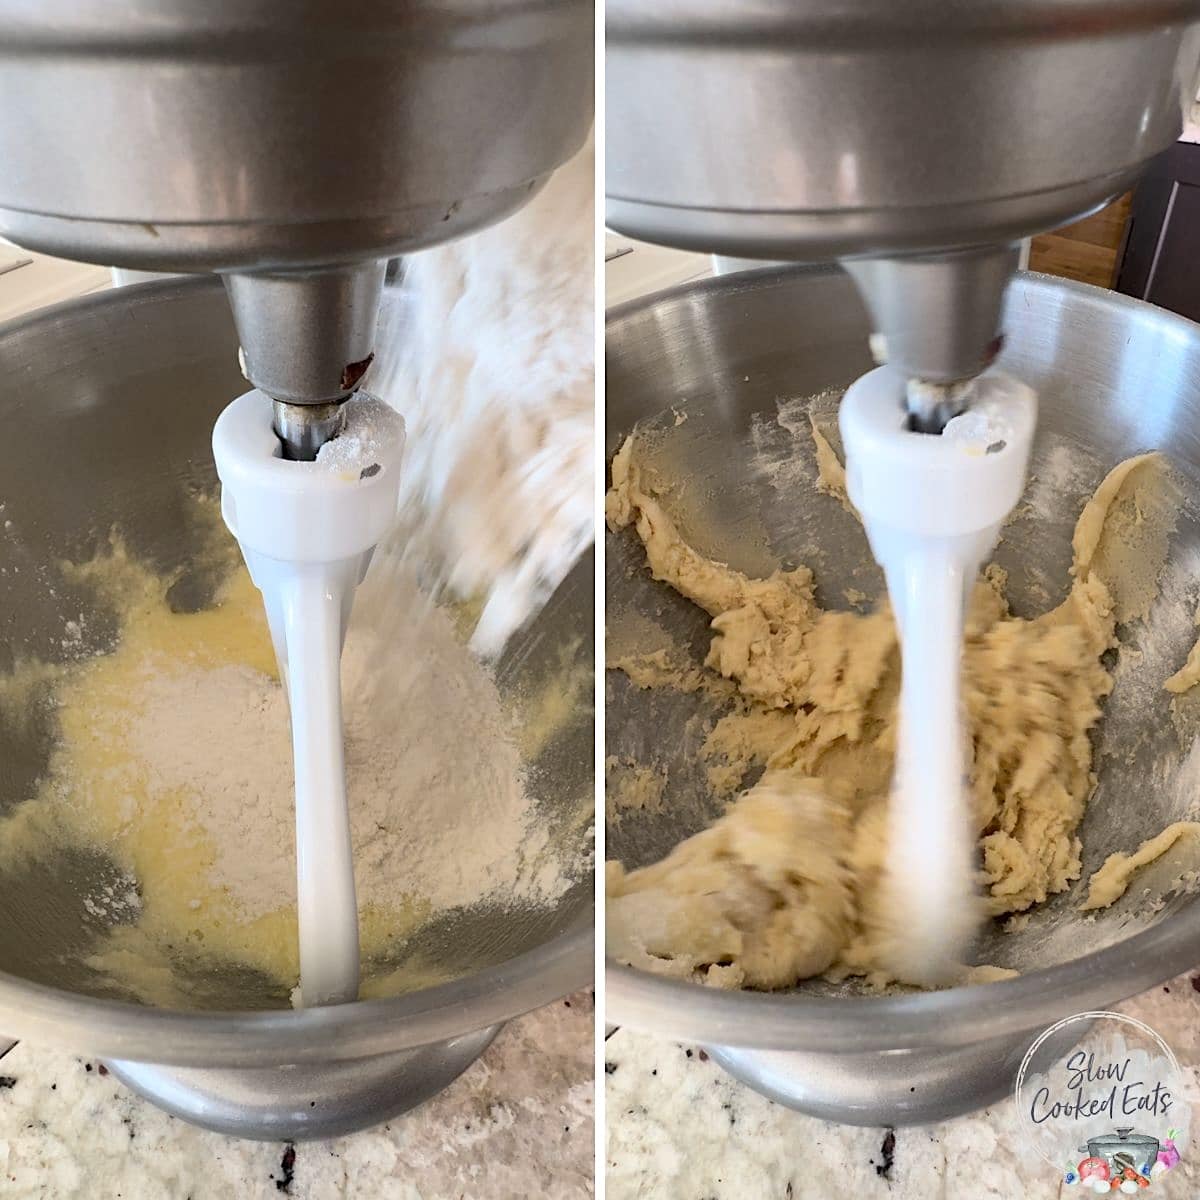 Adding dry ingredients to the mixer for banana bread in a crockpot.